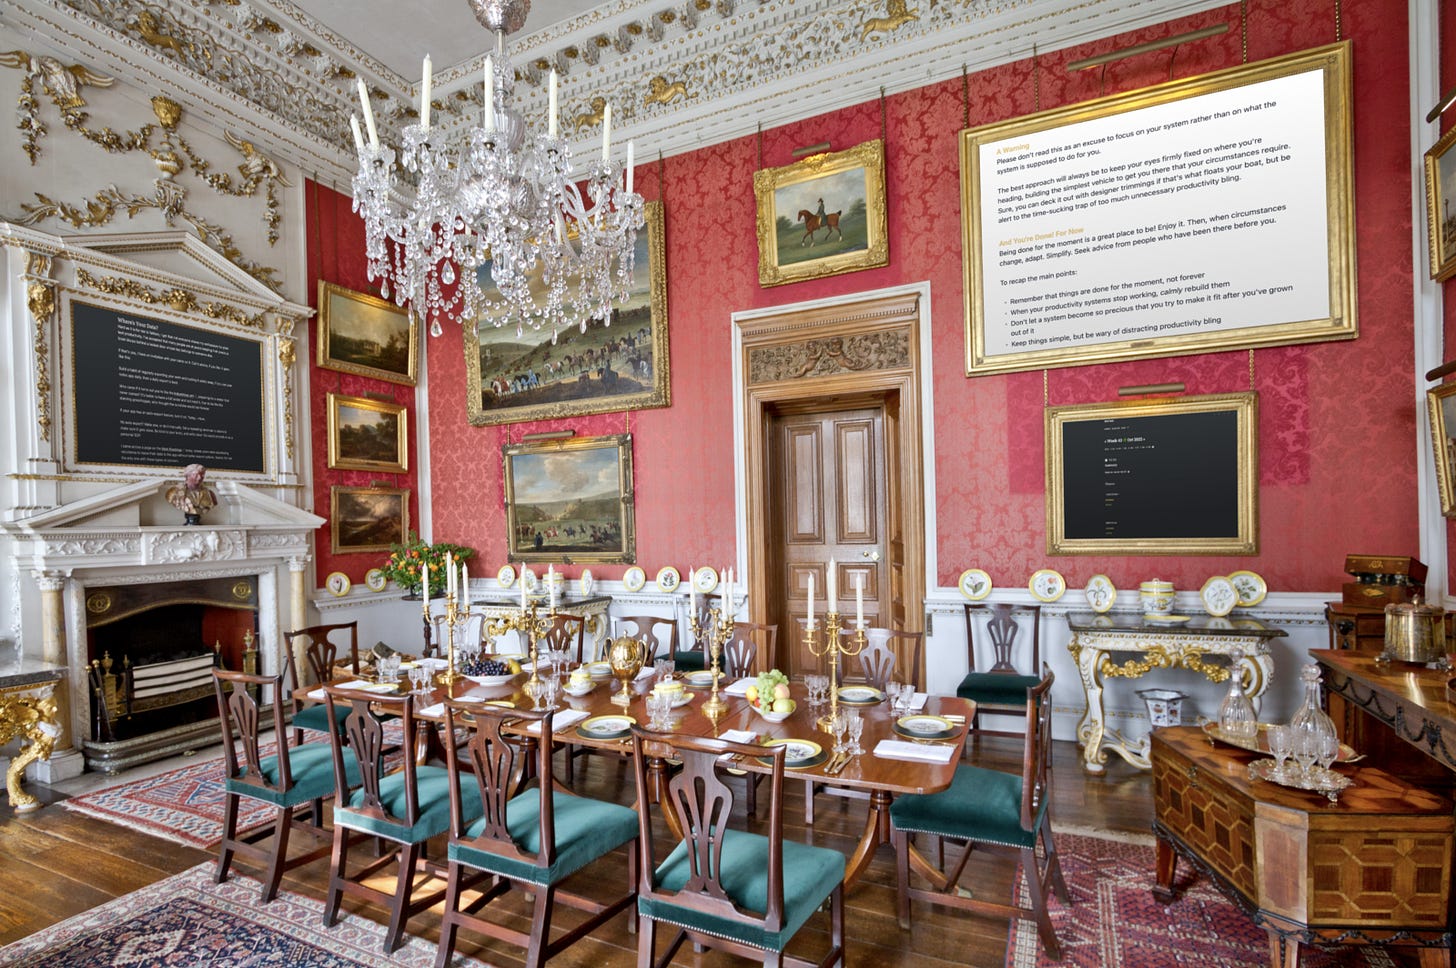 A richly decorated dining room with text from notes apps showing in the picture frames.